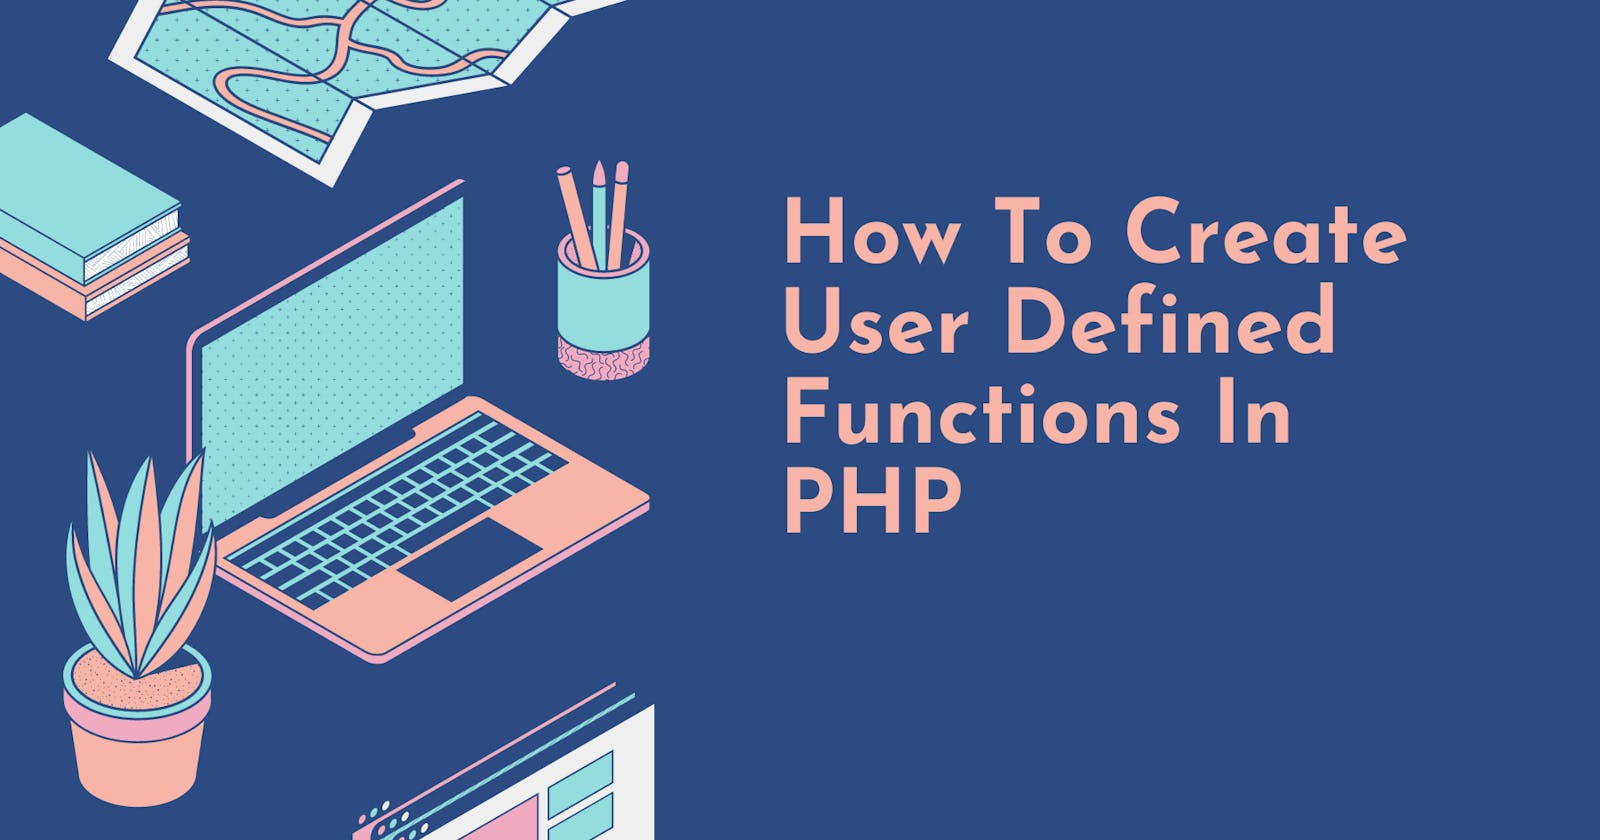 How To Create User-Defined Functions In PHP